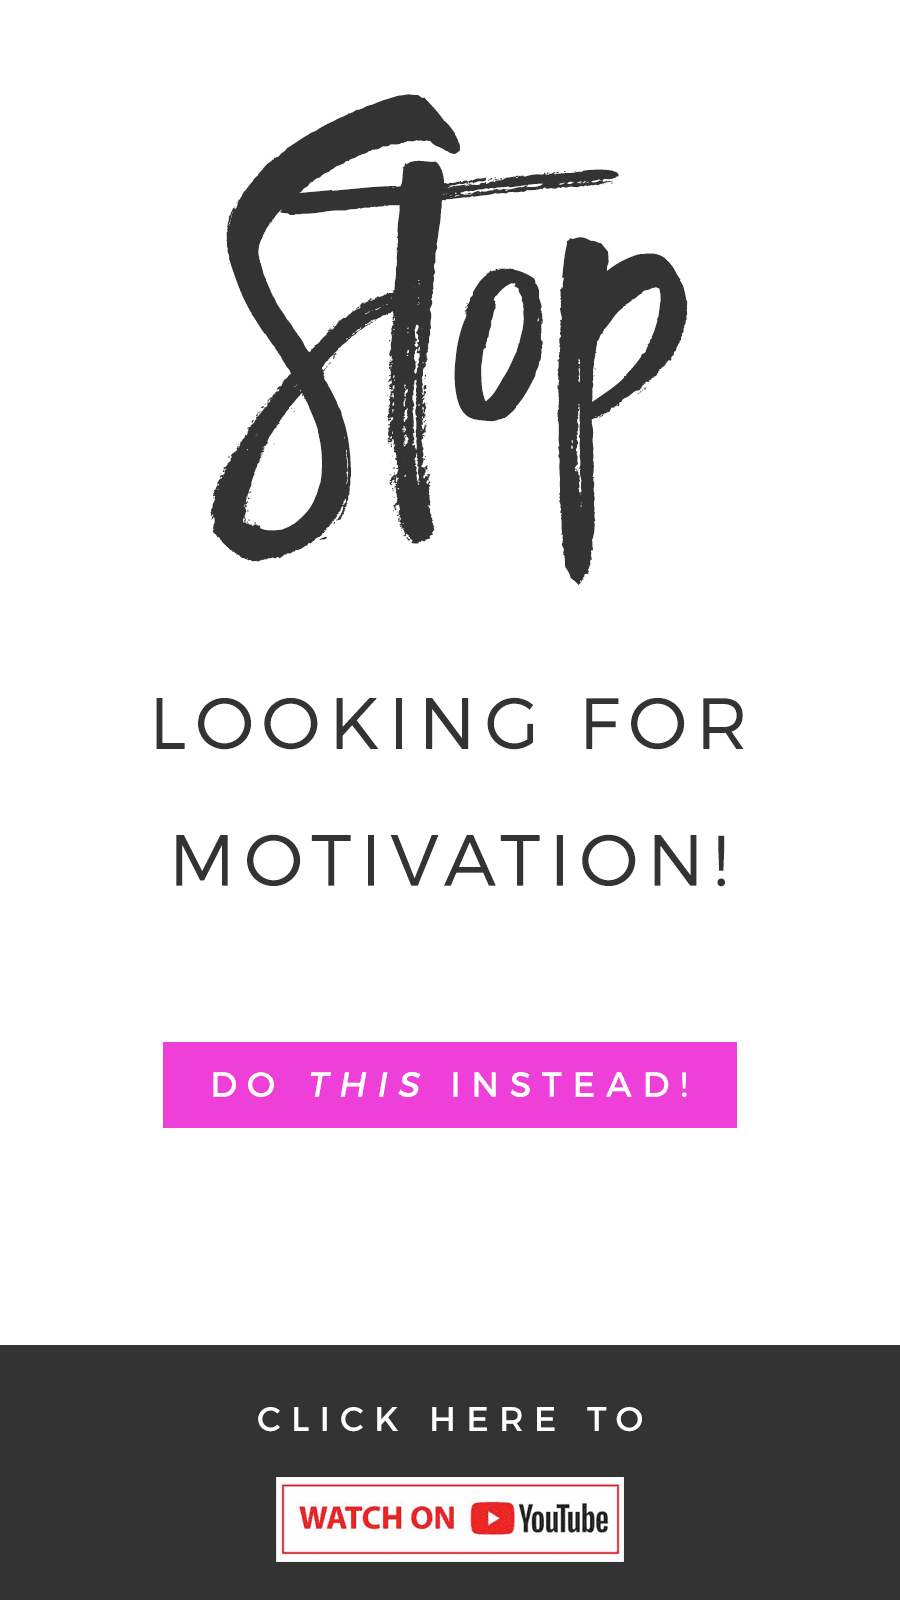 Stop Looking For Motivation! Do THIS Instead